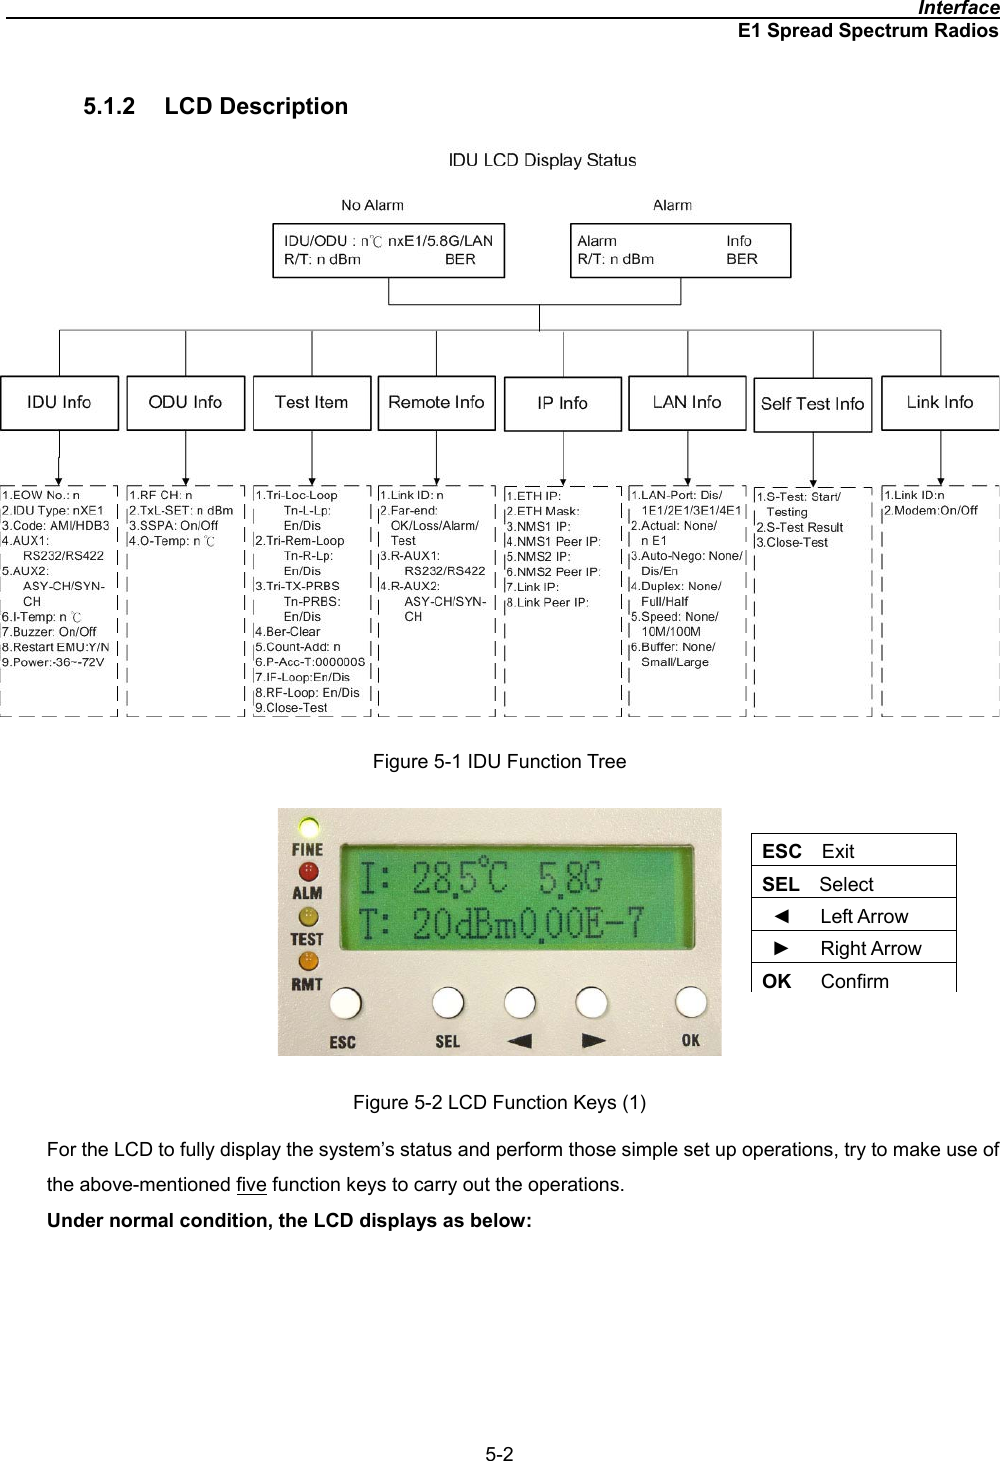                                                                                              InterfaceE1 Spread Spectrum Radios5-25.1.2 LCD Description Figure 5-1 IDU Function Tree Figure 5-2 LCD Function Keys (1) For the LCD to fully display the system’s status and perform those simple set up operations, try to make use of the above-mentioned five function keys to carry out the operations. Under normal condition, the LCD displays as below:ESC  ExitSEL  Select Ż   Left Arrow Ź   Right Arrow OK   Confirm